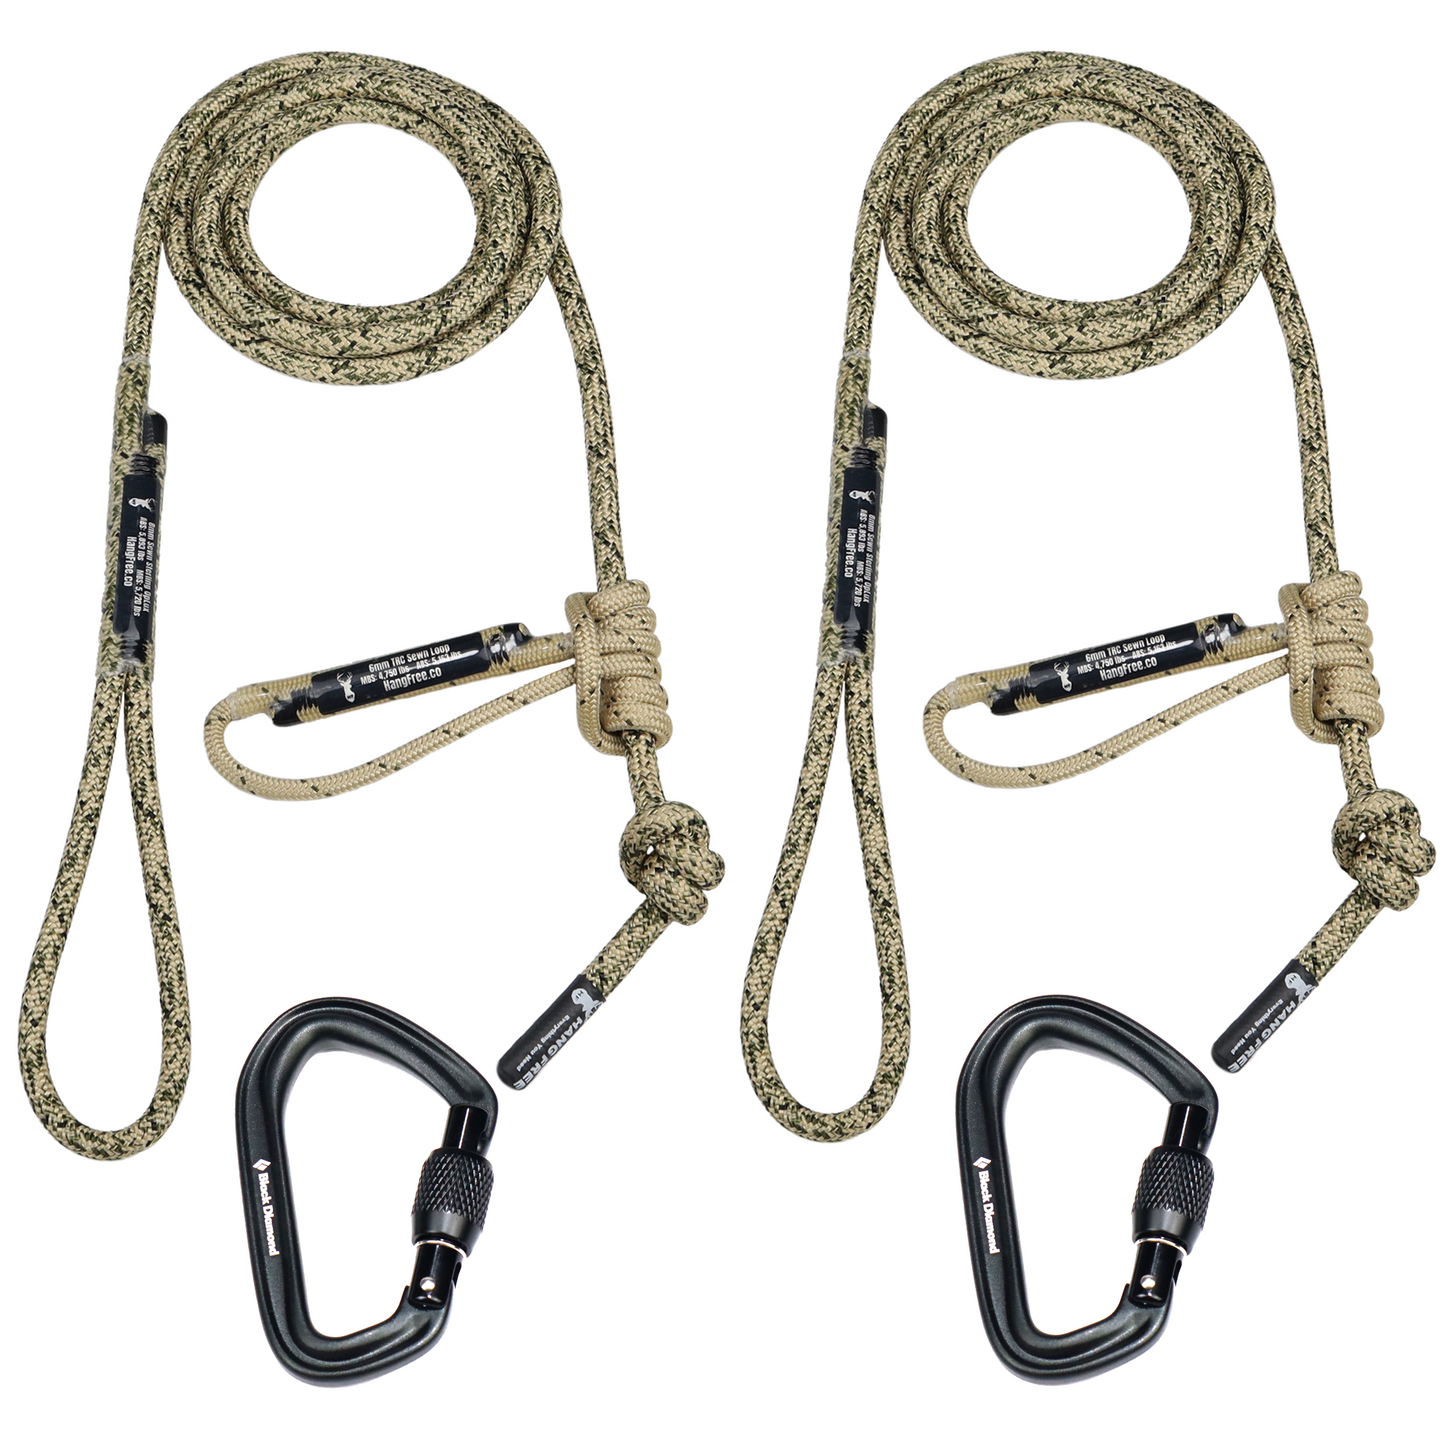 8mm OpLux Standard Tether & Lineman's Package with Carabiners